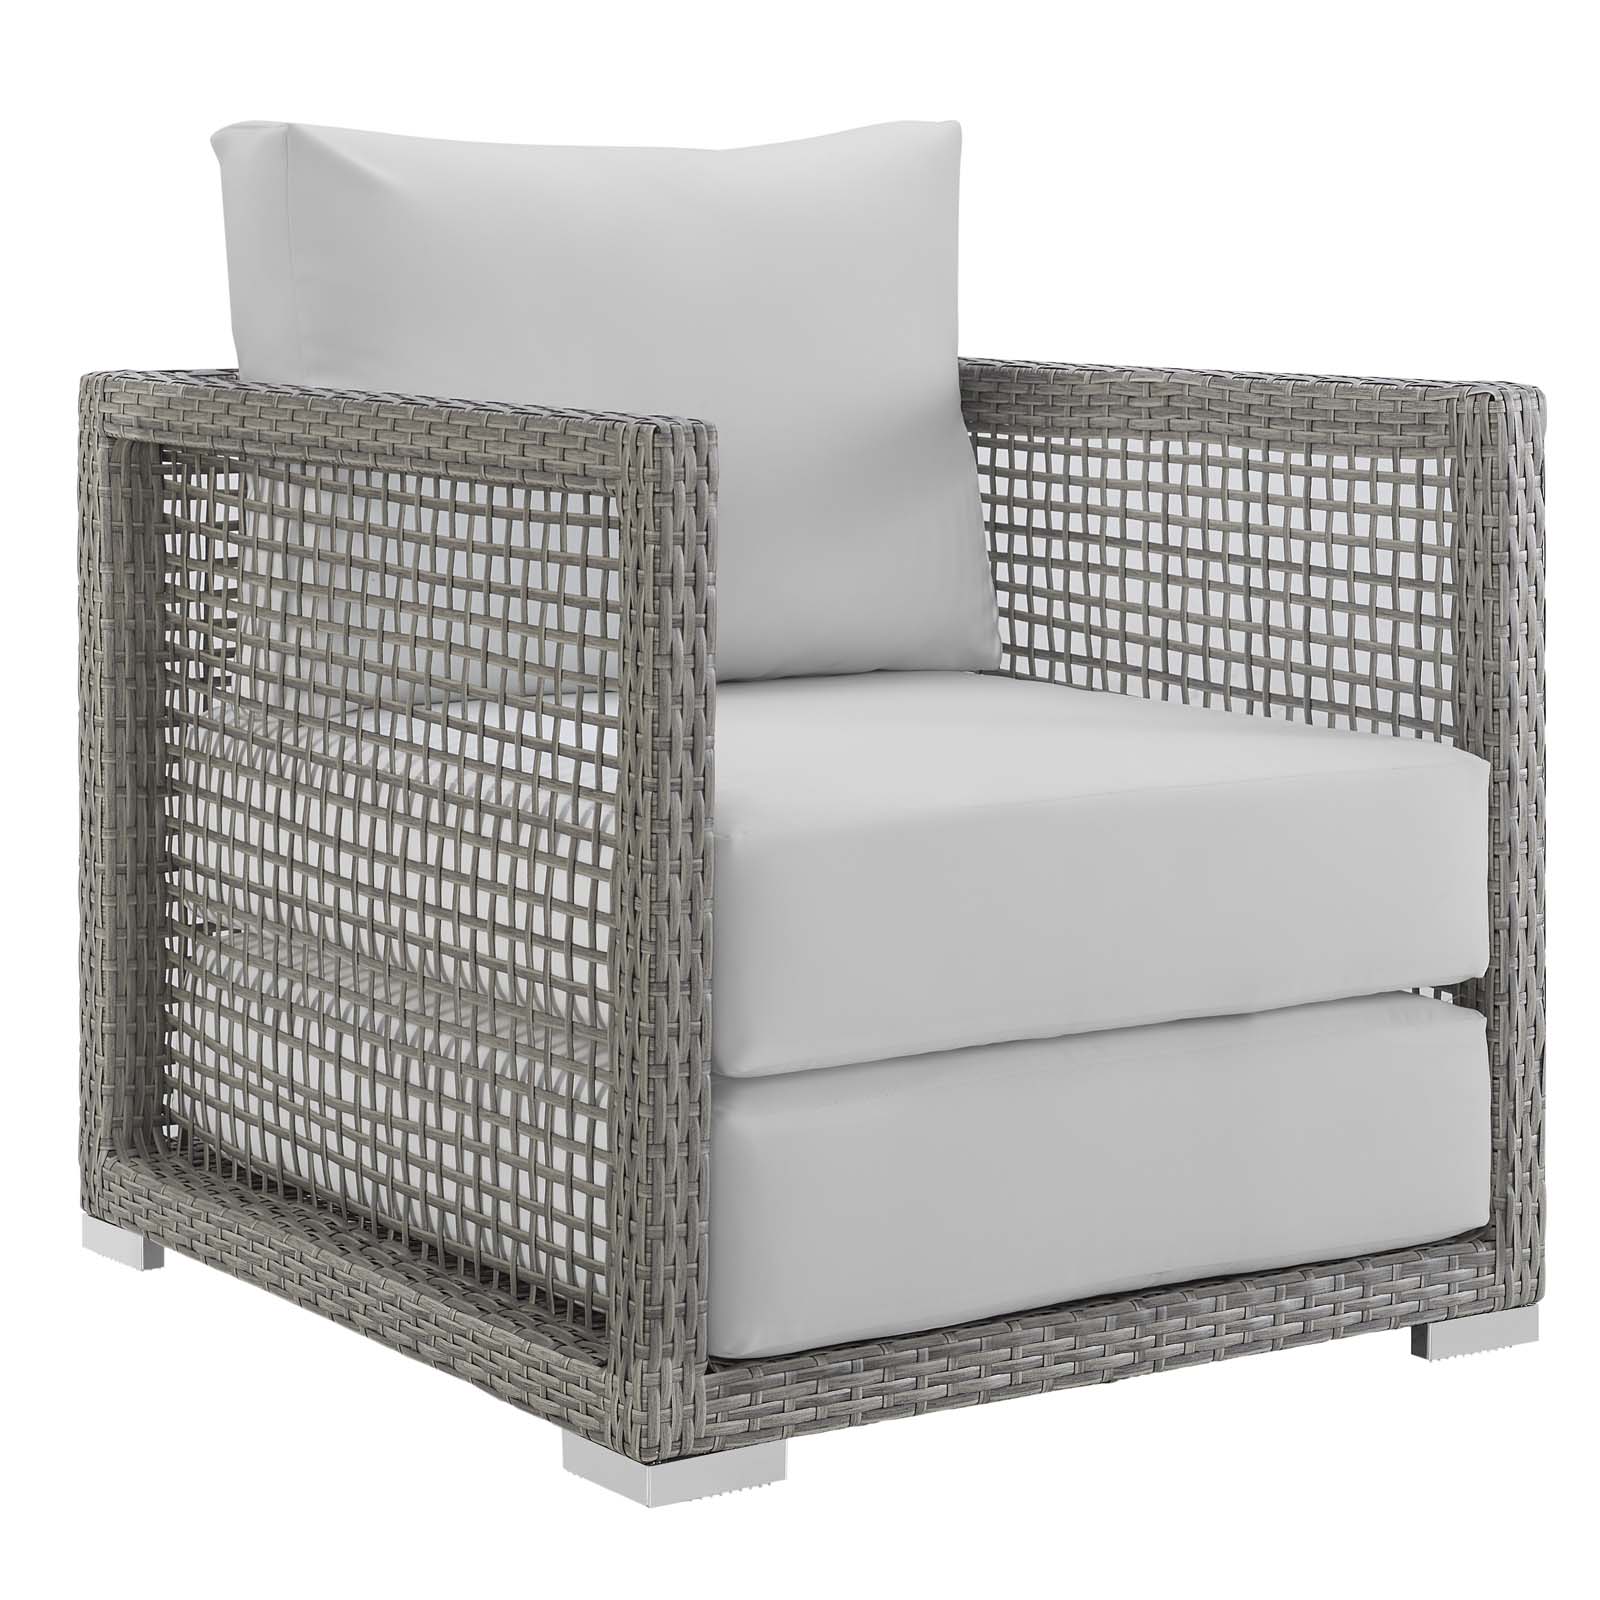 Contemporary Modern Urban Designer Outdoor Patio Balcony Garden Furniture Lounge Sofa, Chair and Coffee Table Set, Rattan Wicker Fabric, Grey Gray White - image 3 of 8